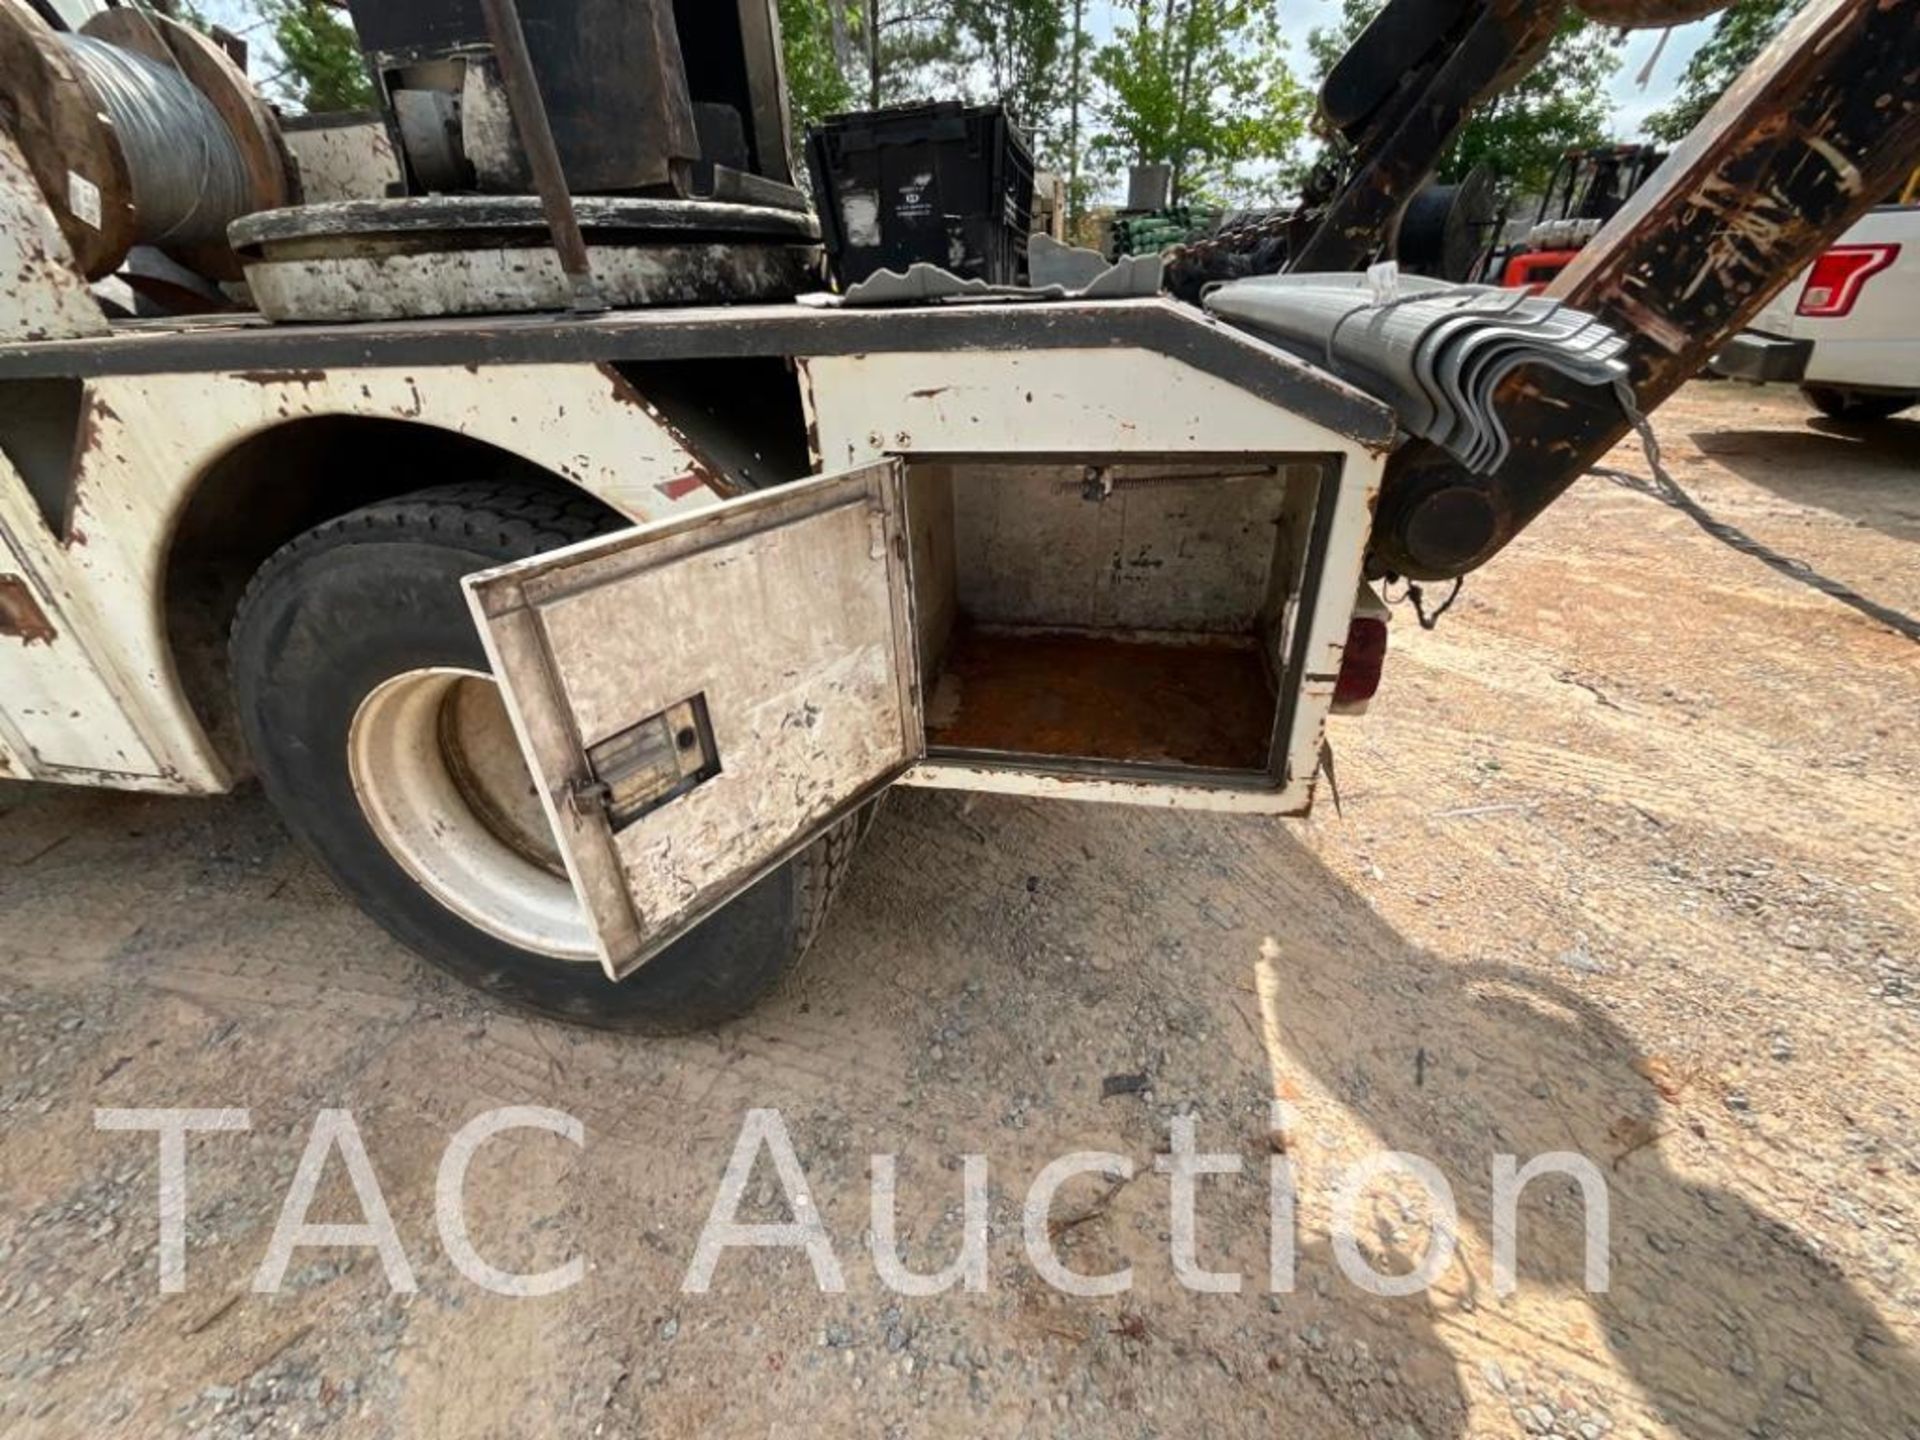 2006 International 4300 Cable Placer Bucket Truck - Image 12 of 64